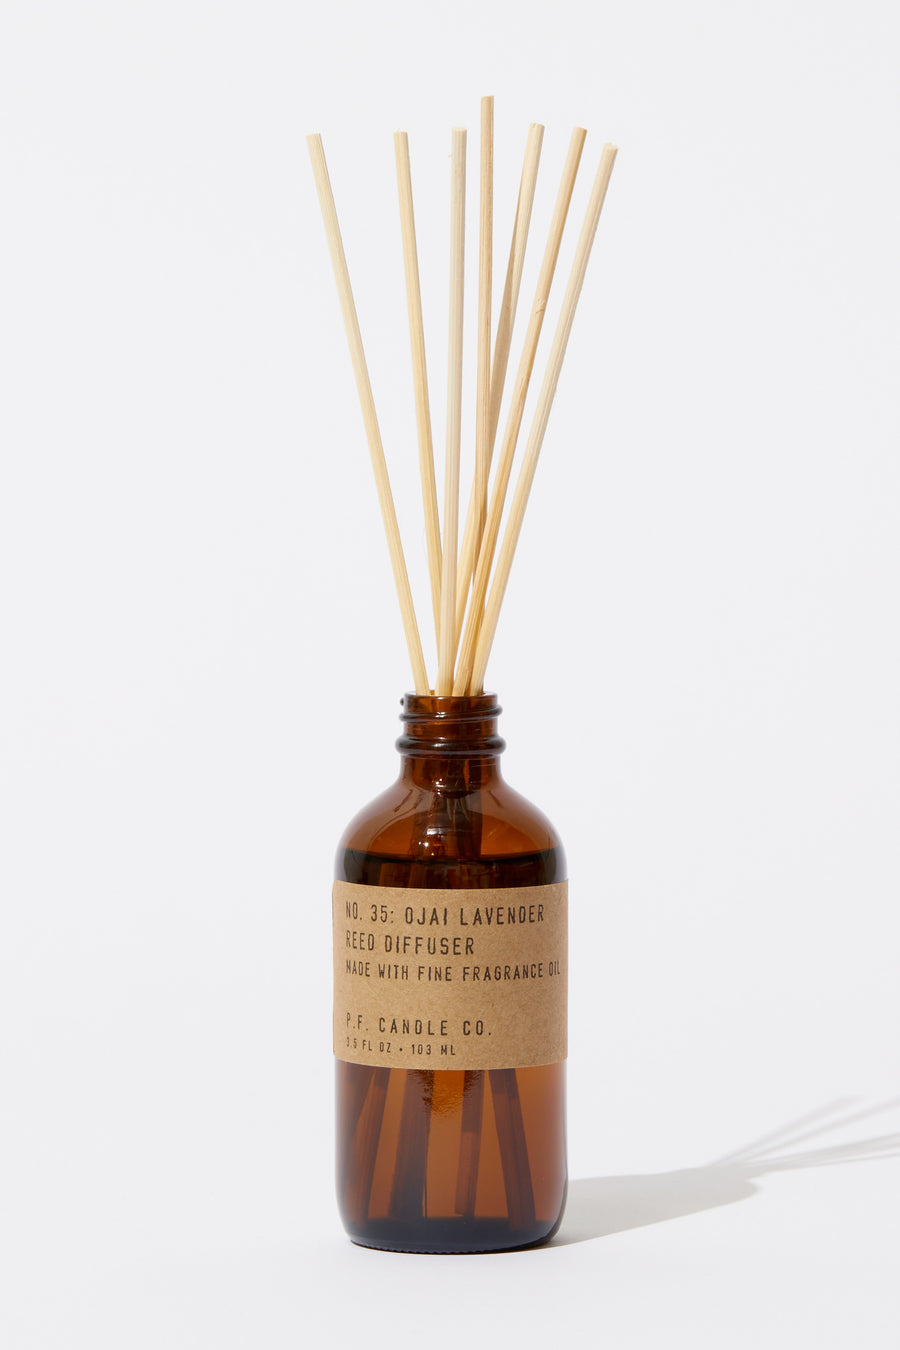 P.F. Candle Co. Reed Diffuser - Ojai Lavender